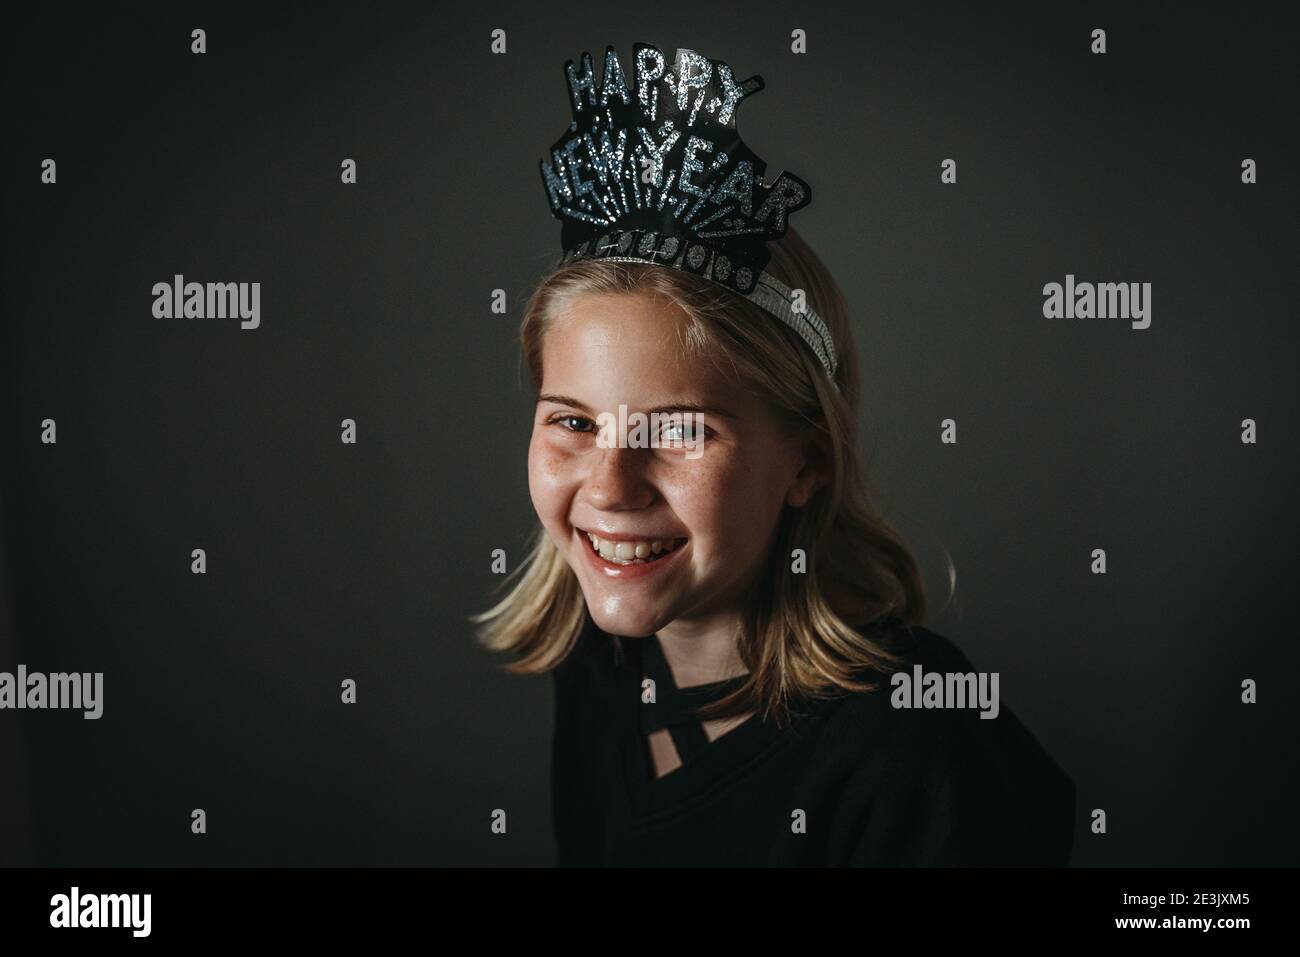 Portrait of young girl with Happy New Year hat smiling Stock Photo